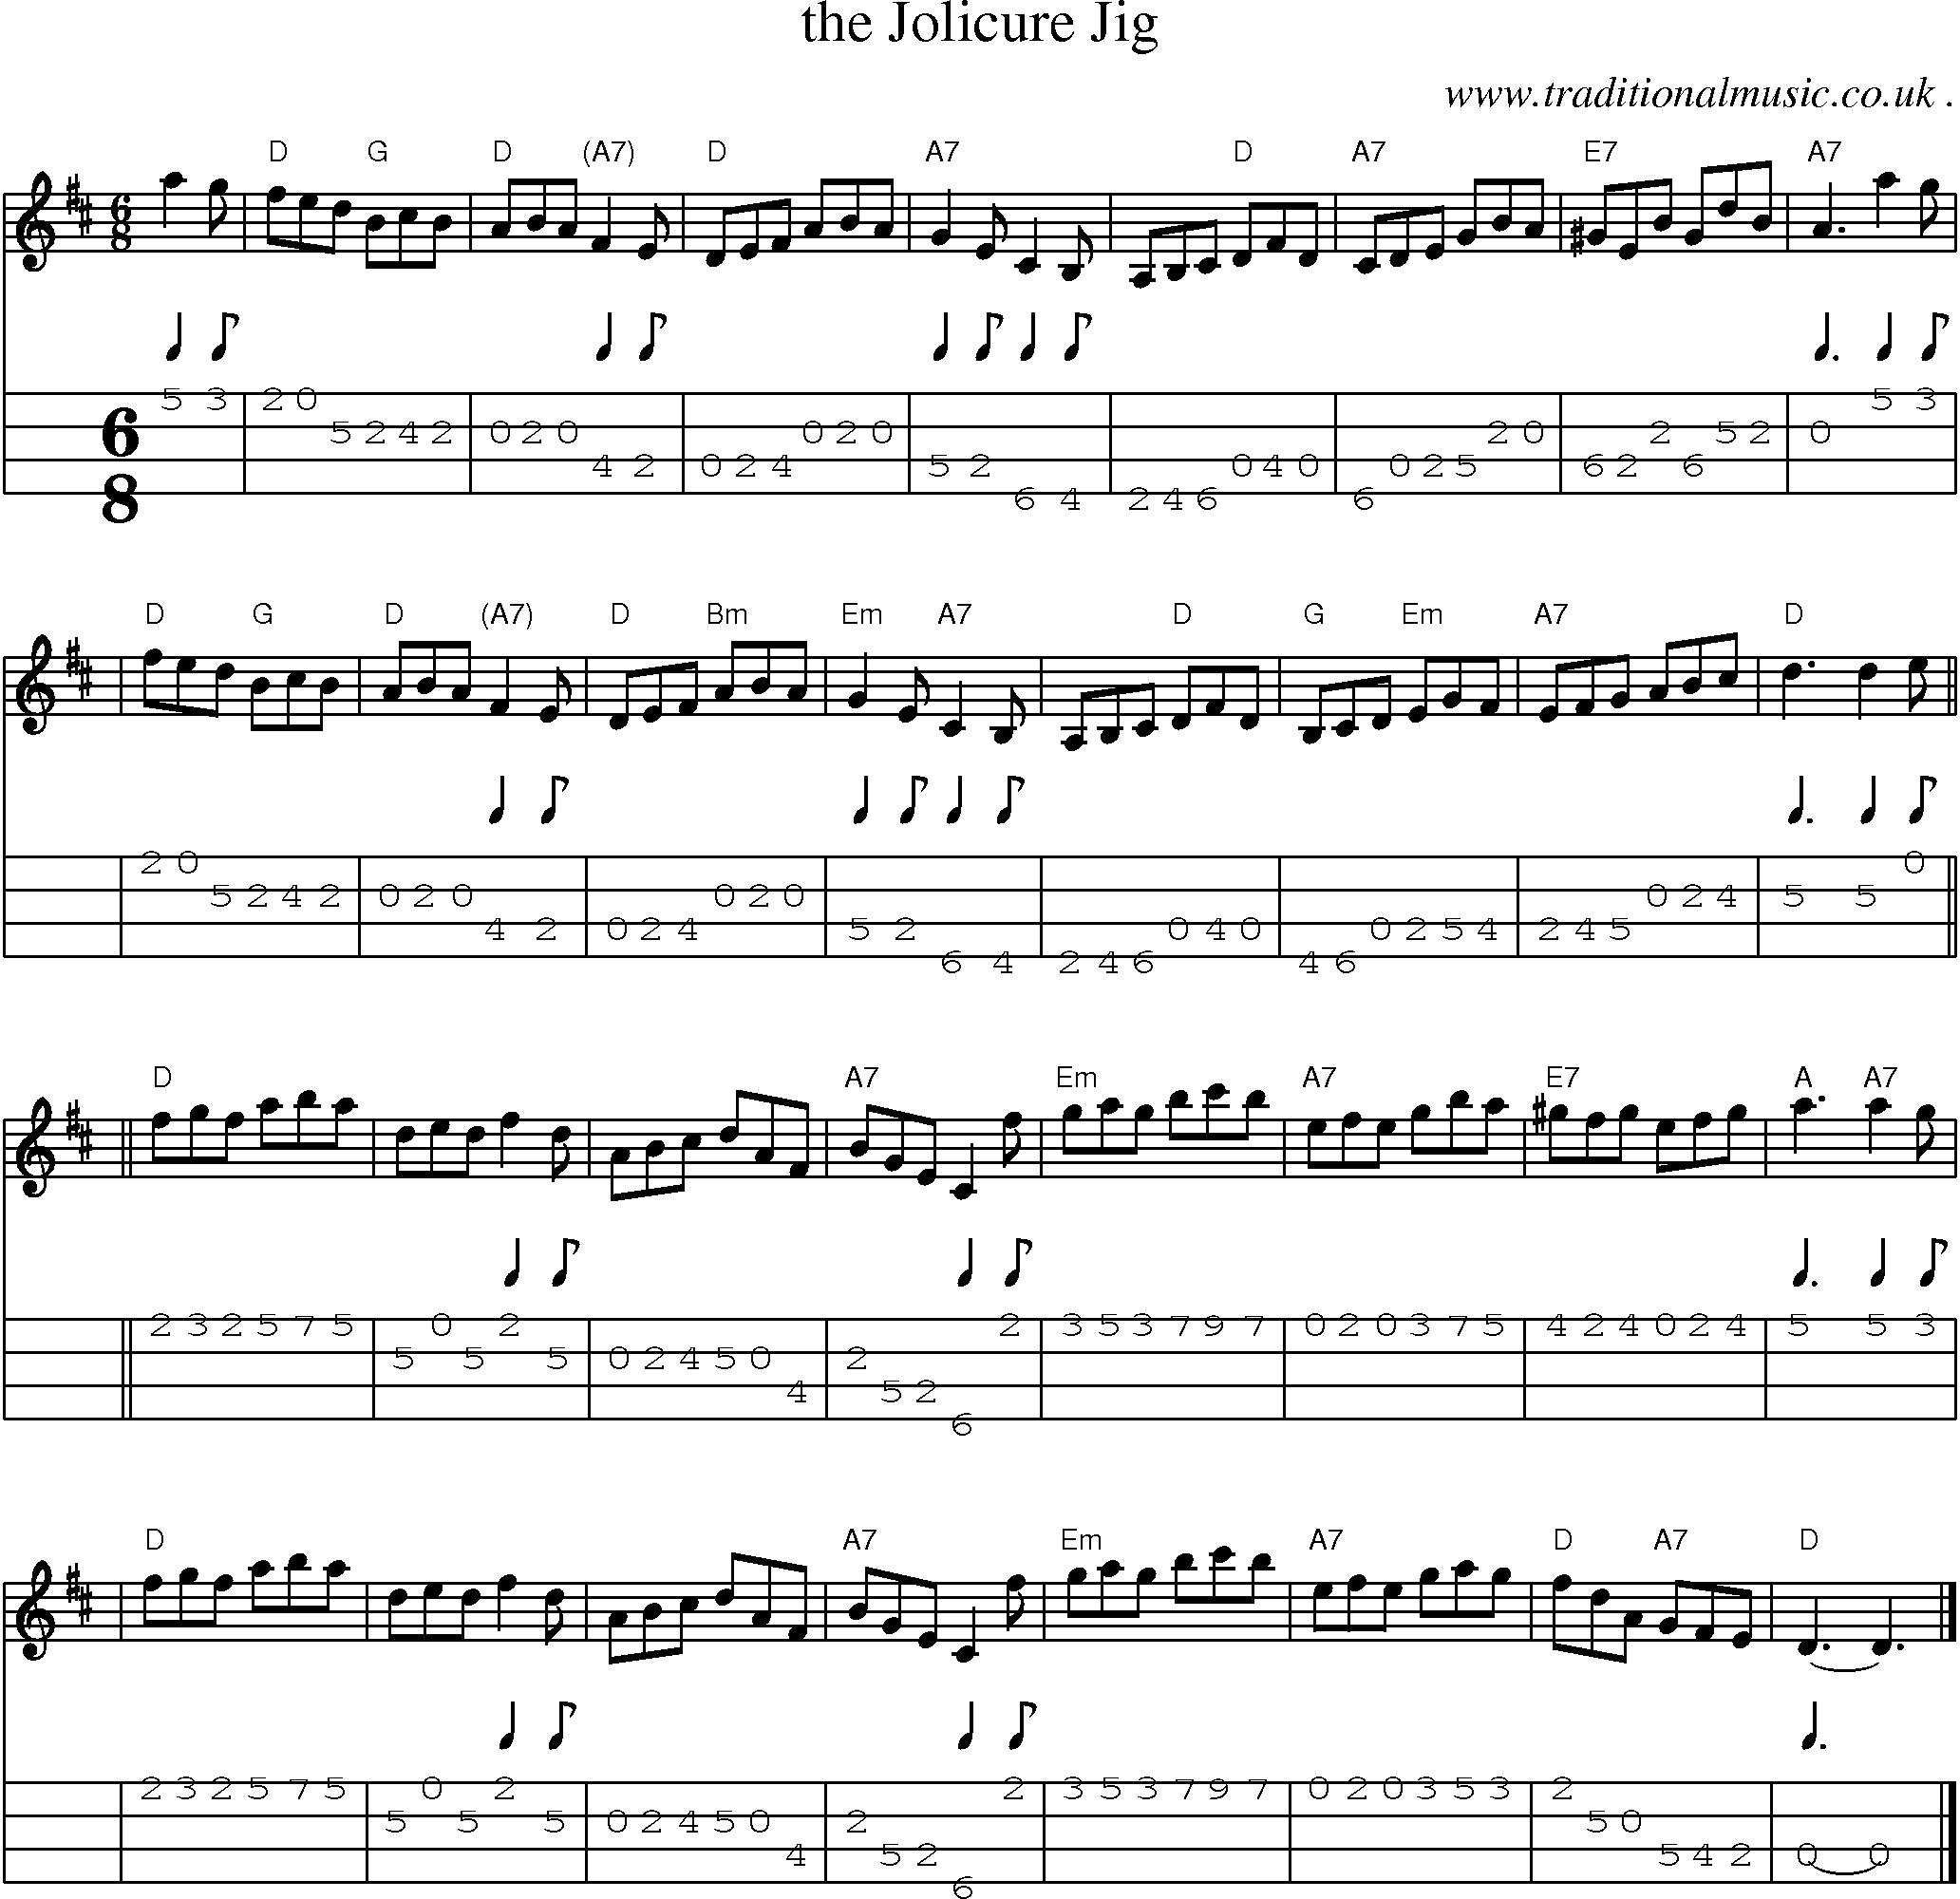 Sheet-music  score, Chords and Mandolin Tabs for The Jolicure Jig